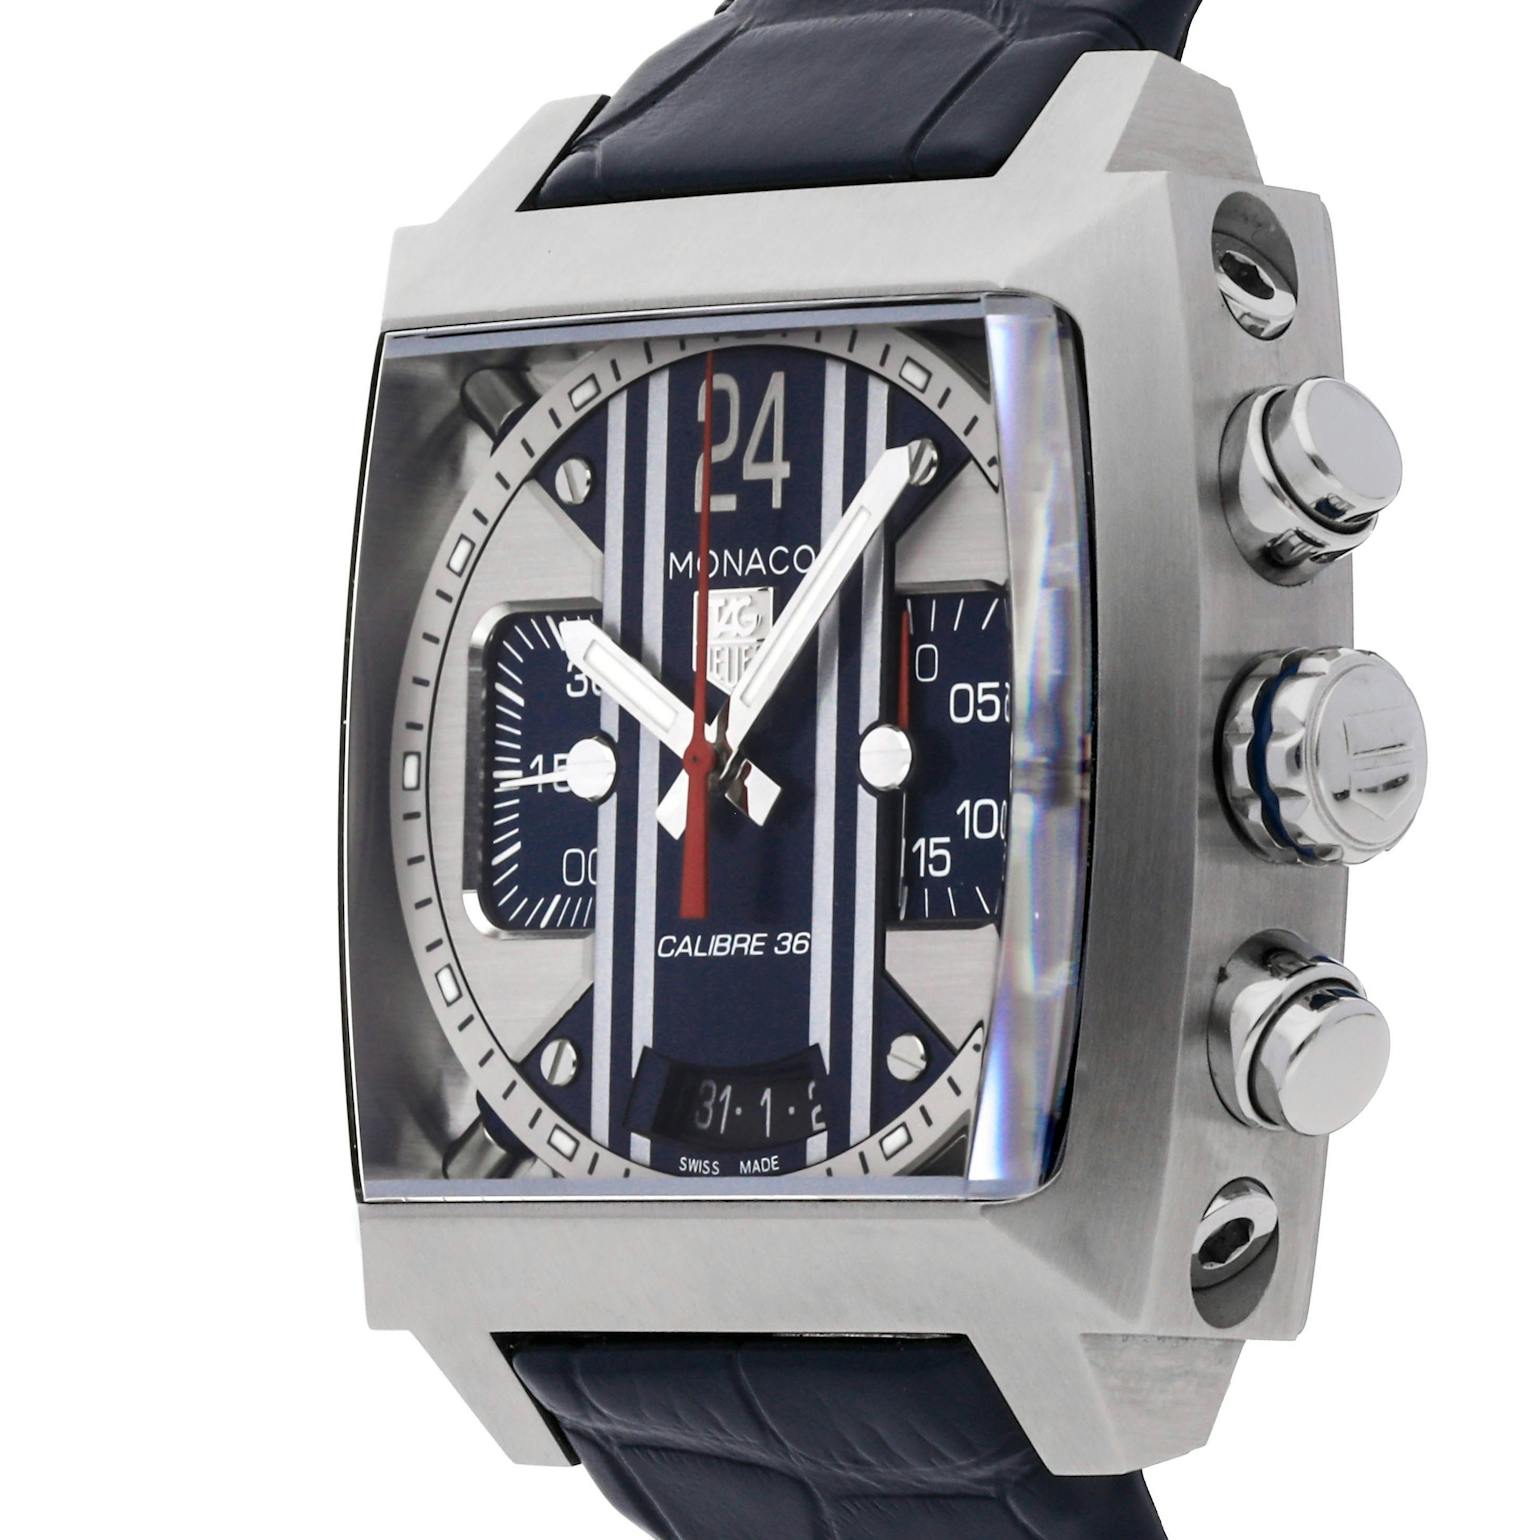 Pre-owned Tag Heuer Monaco 24 Calibre 36 - Pre-owned Watches